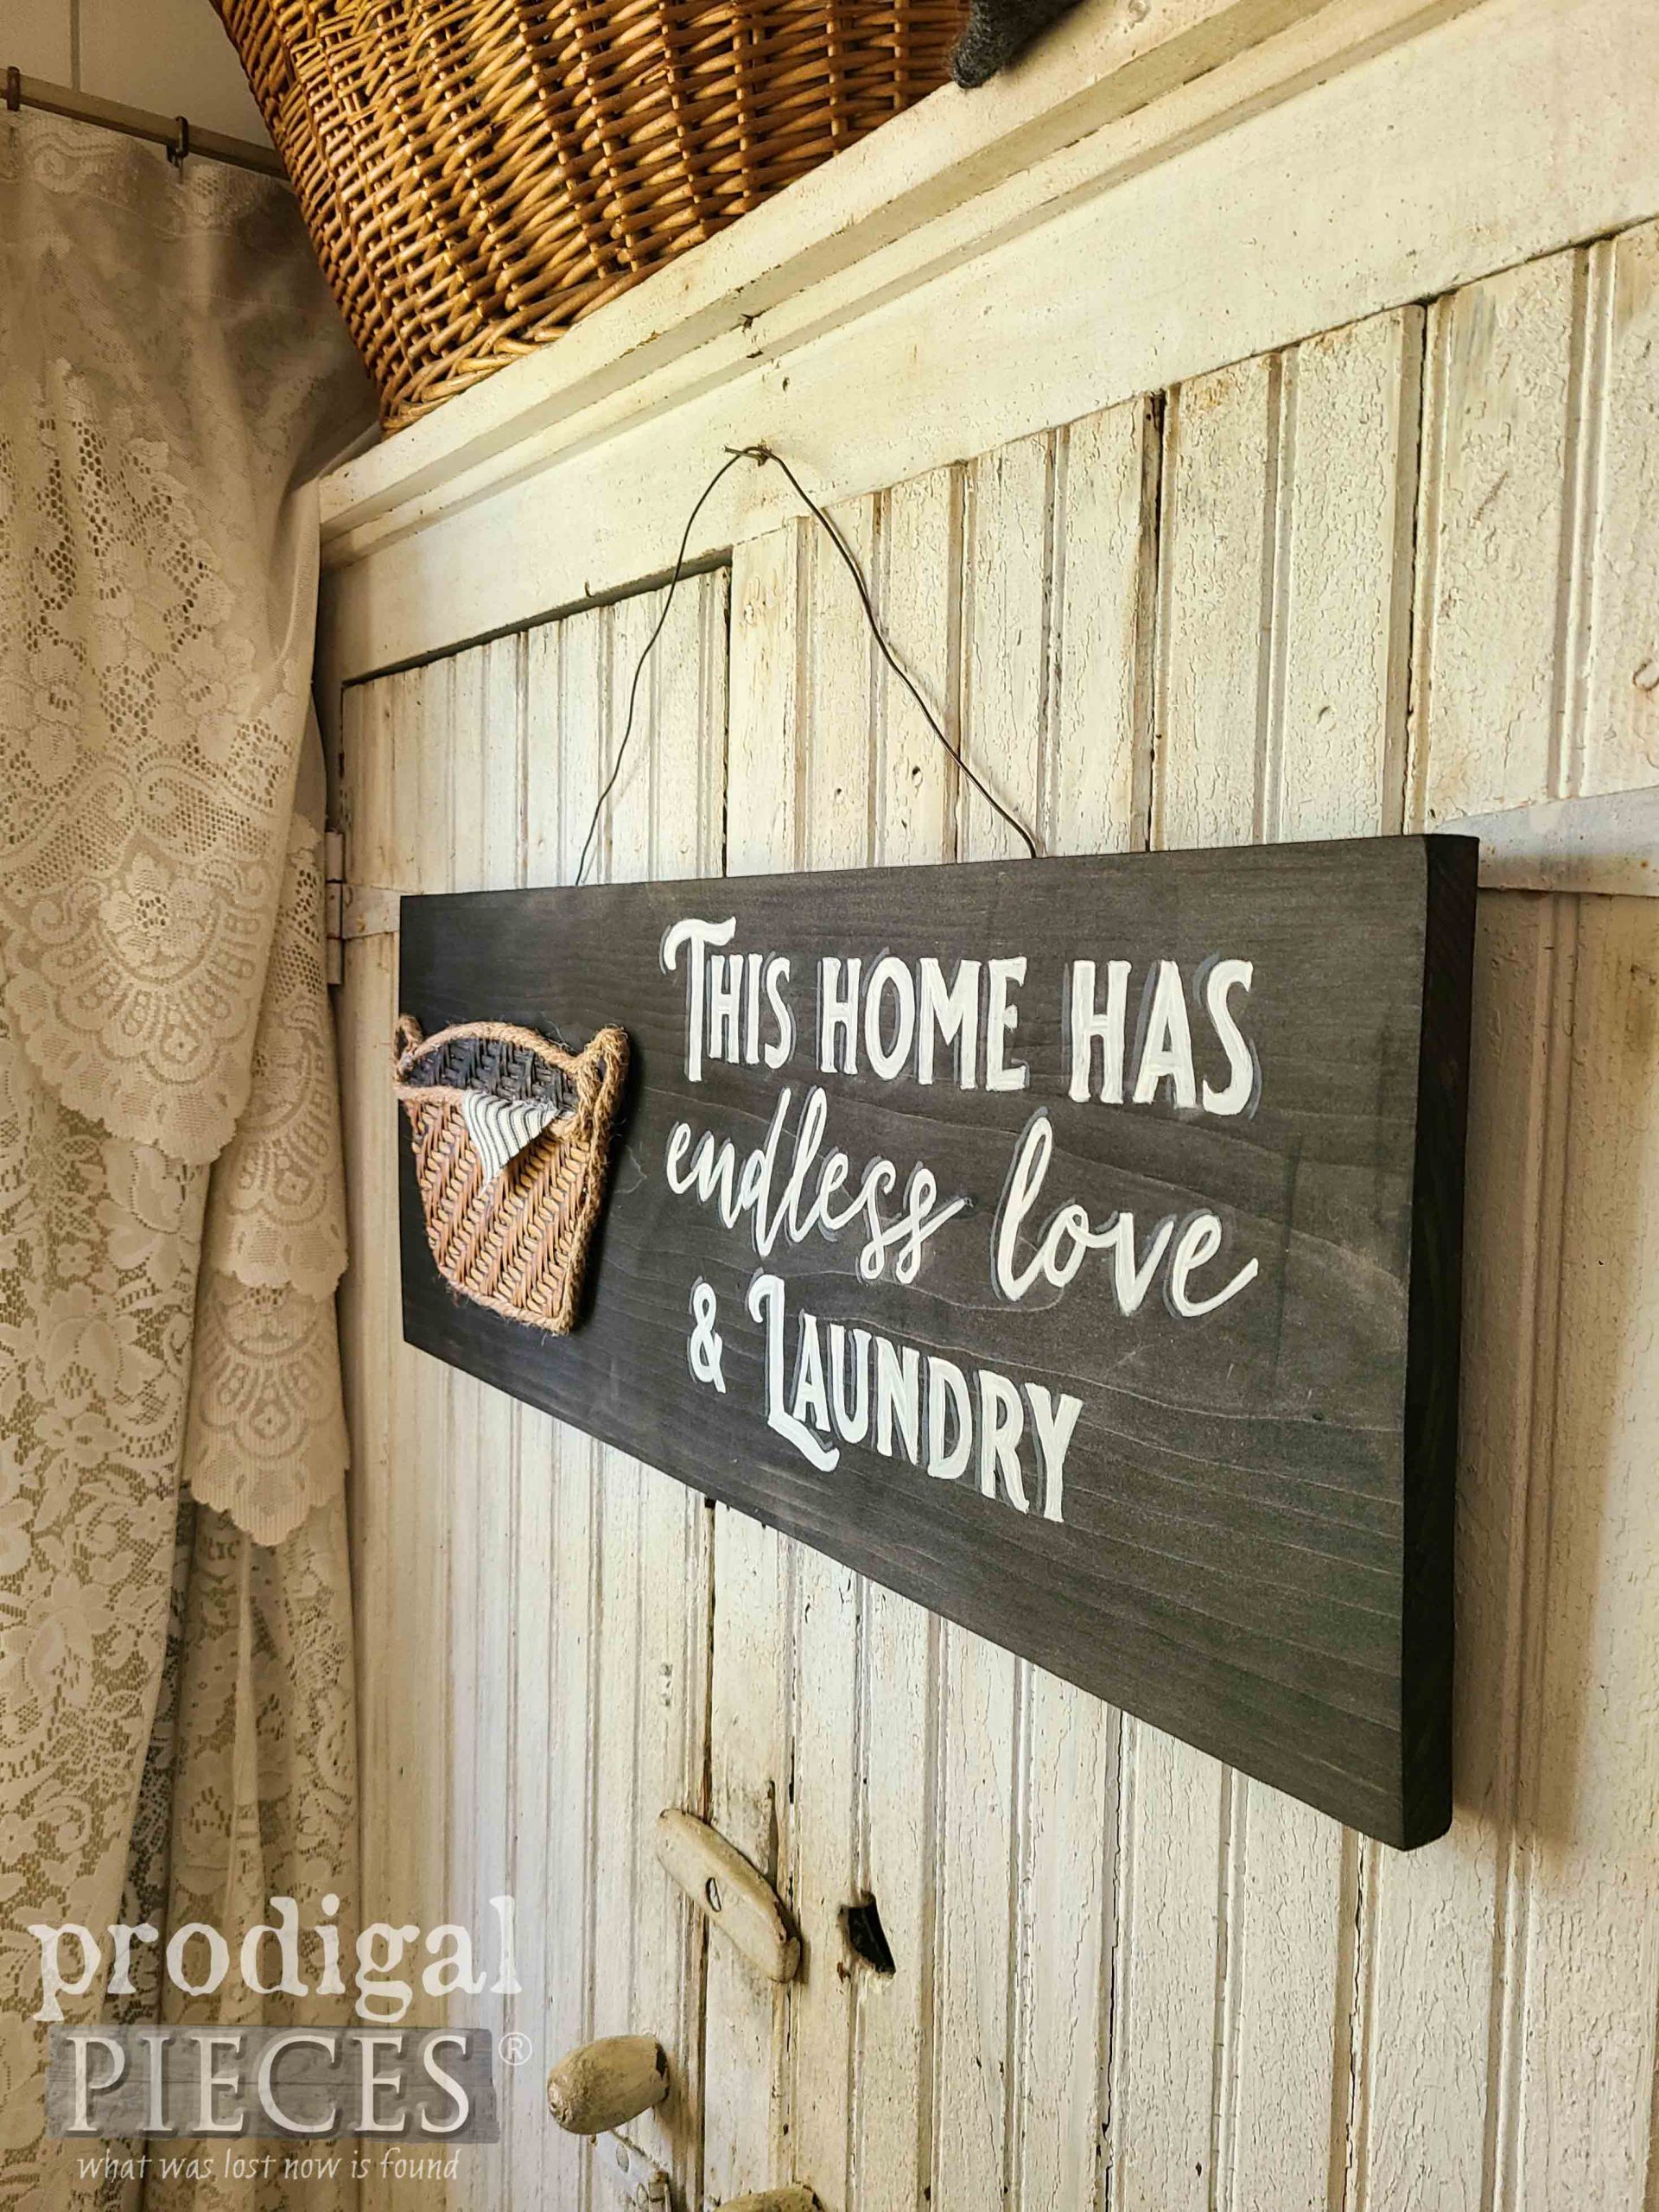 Endless Love & Laundry Sign by Larissa of Prodigal Pieces | prodigalpieces.com #prodigalpieces #handmade #diy #farmhouse